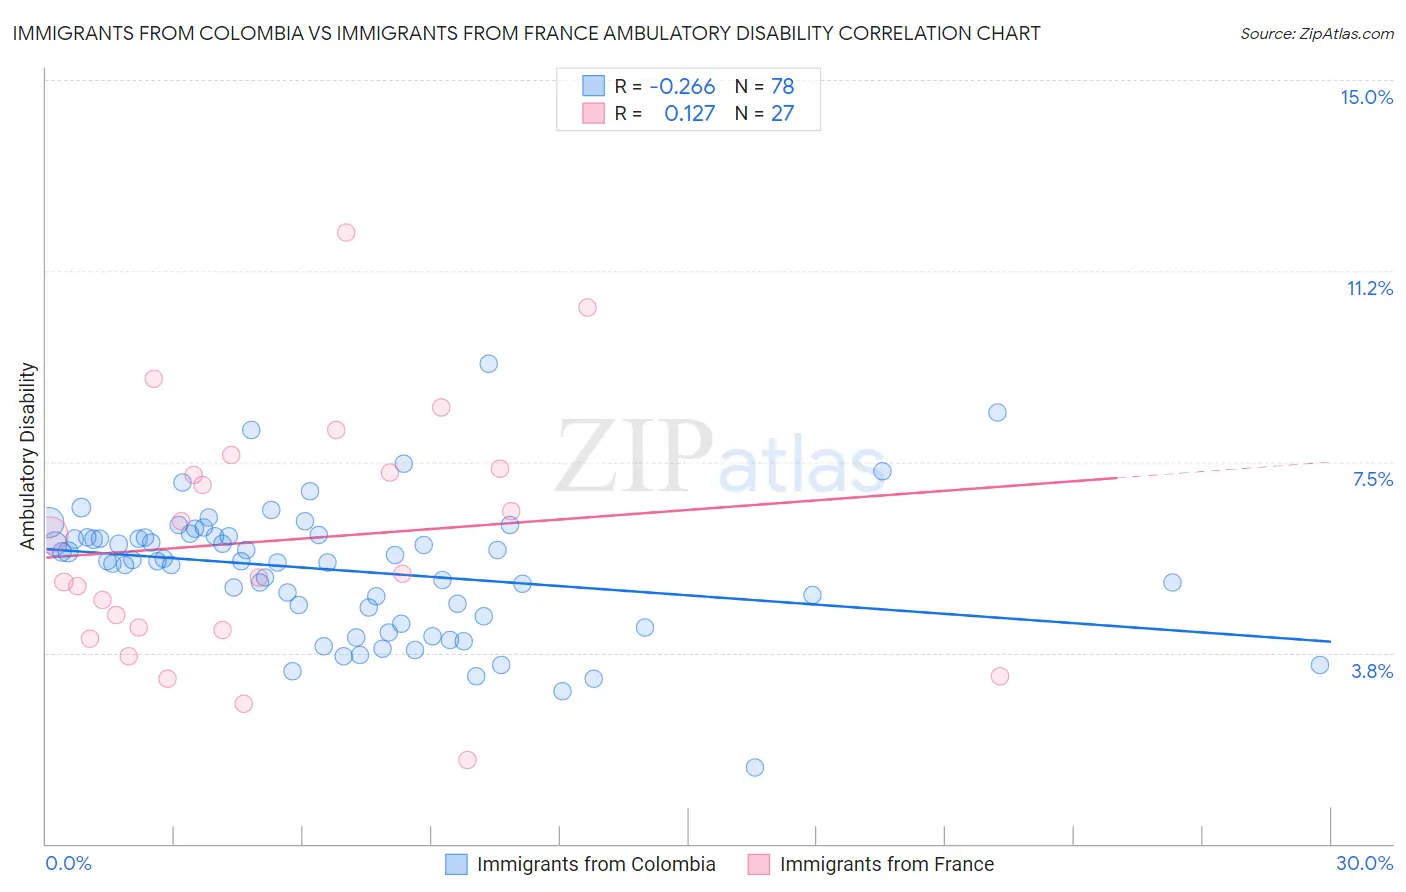 Immigrants from Colombia vs Immigrants from France Ambulatory Disability